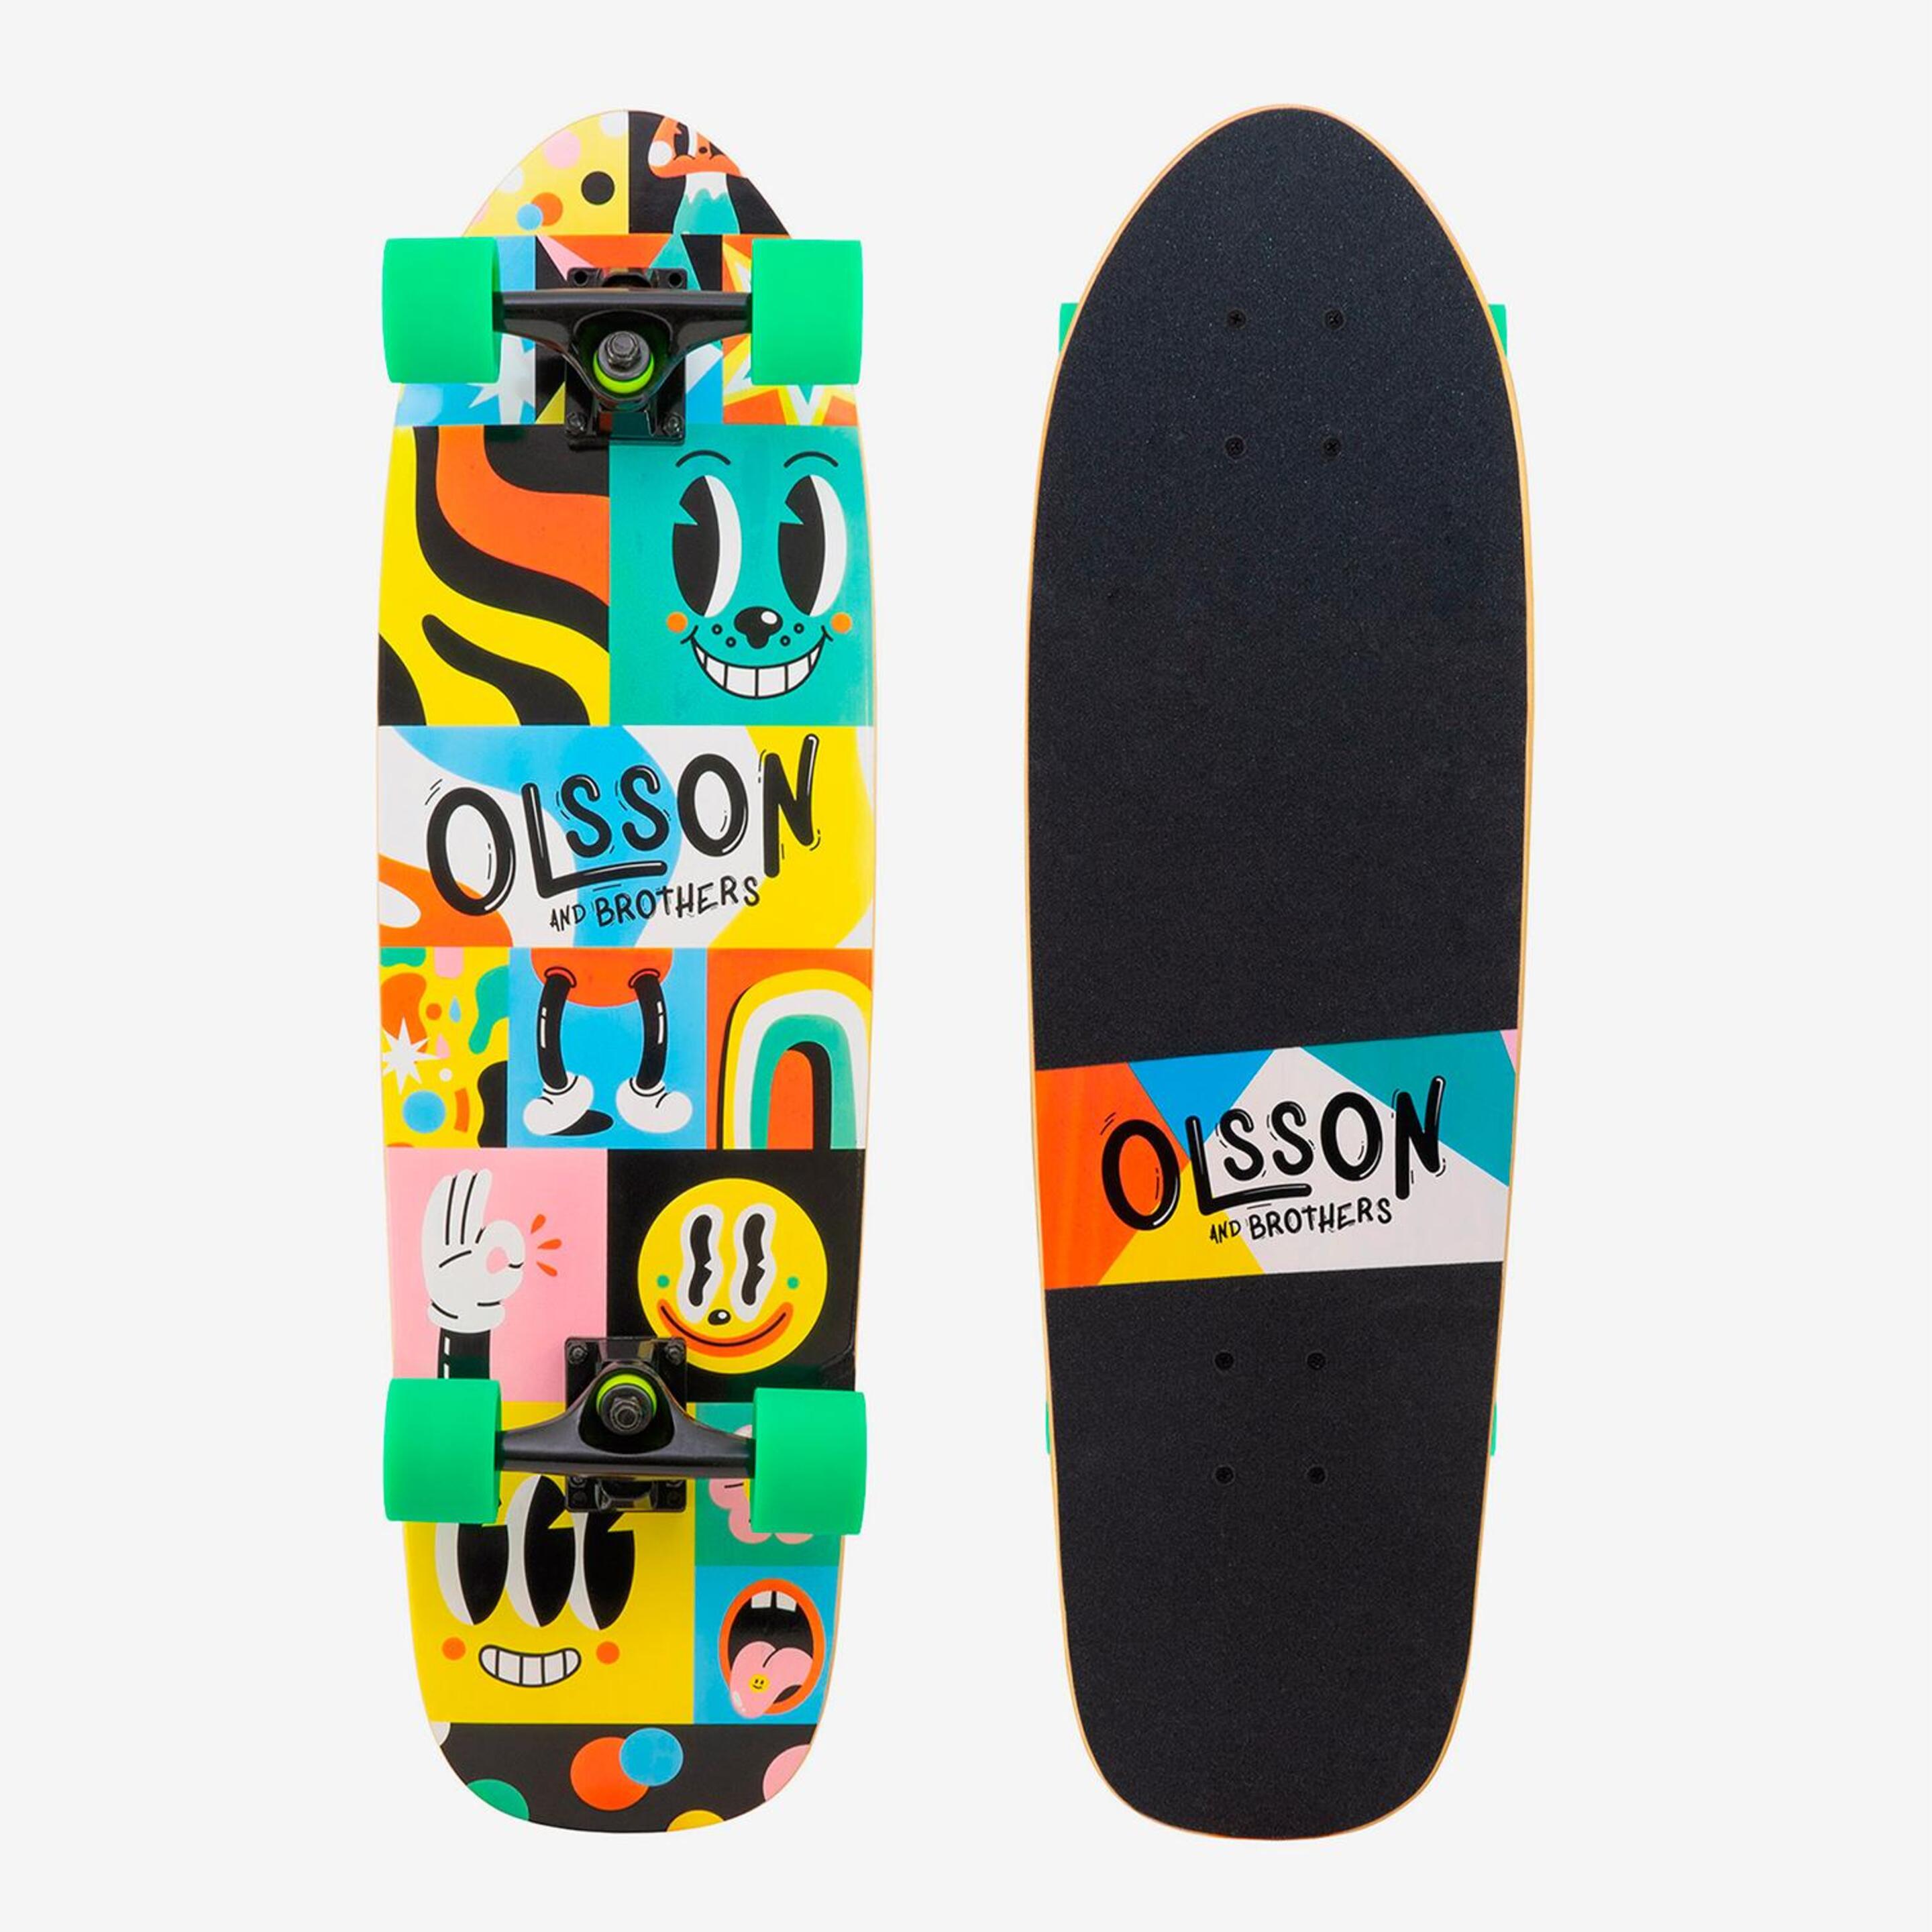 Olsson & Brothers Focus - Colores - Skate